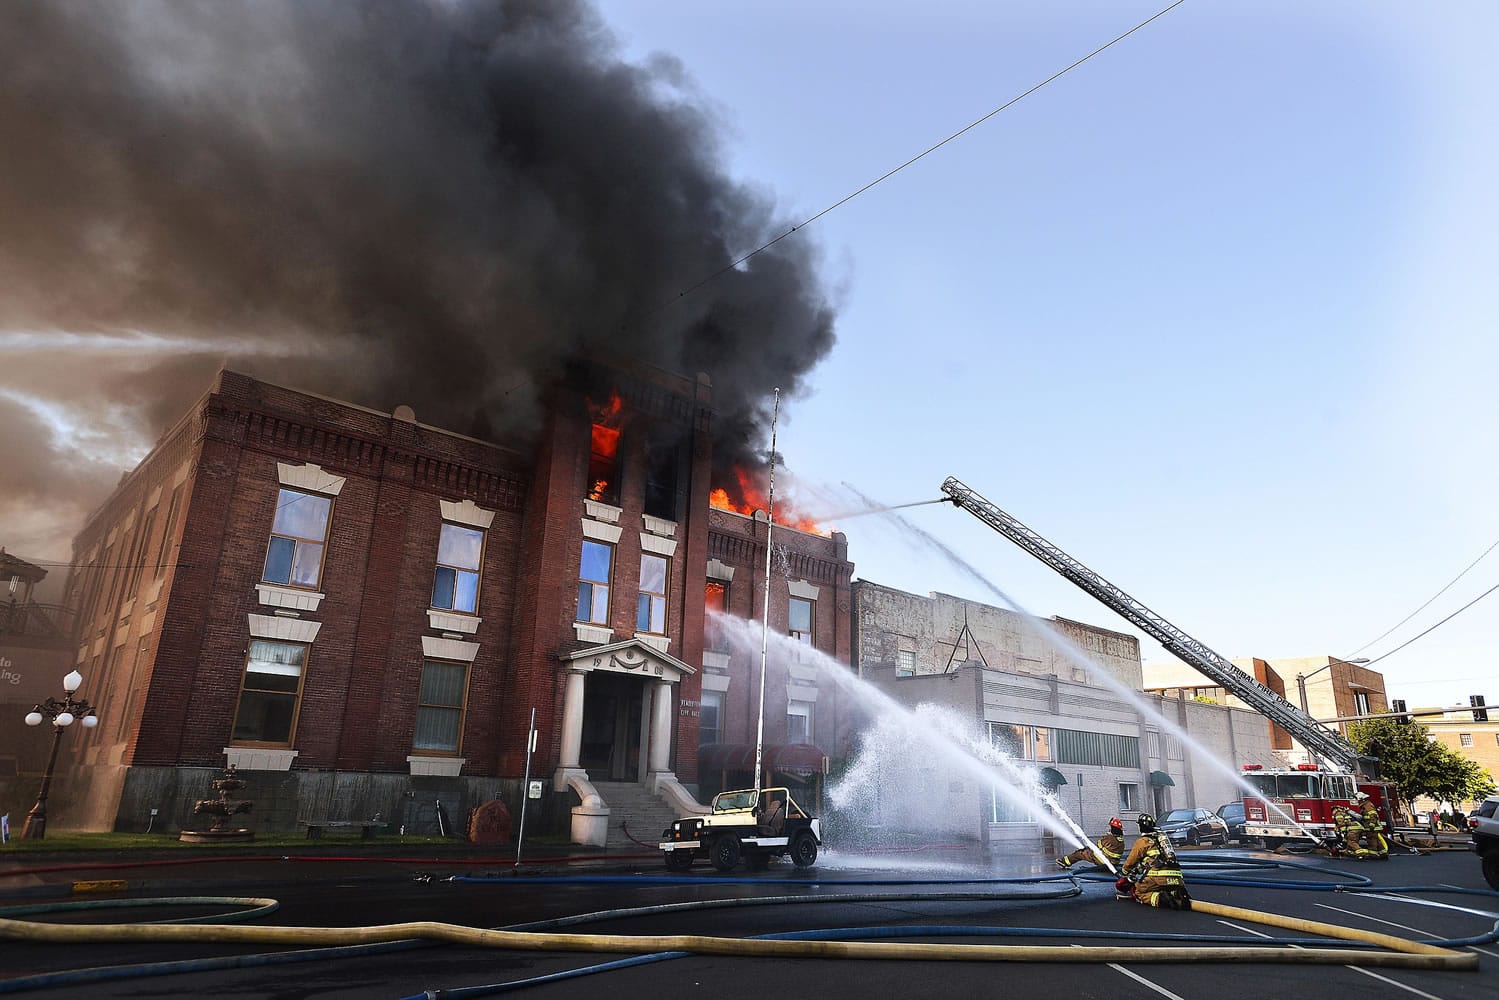 The old City Hall building burns as firefighters from all over Umatilla County battle the blaze in Pendleton, Ore., Tuesday, July 21, 2015. An explosion and fire destroyed part of the city's former government building. (E.J.